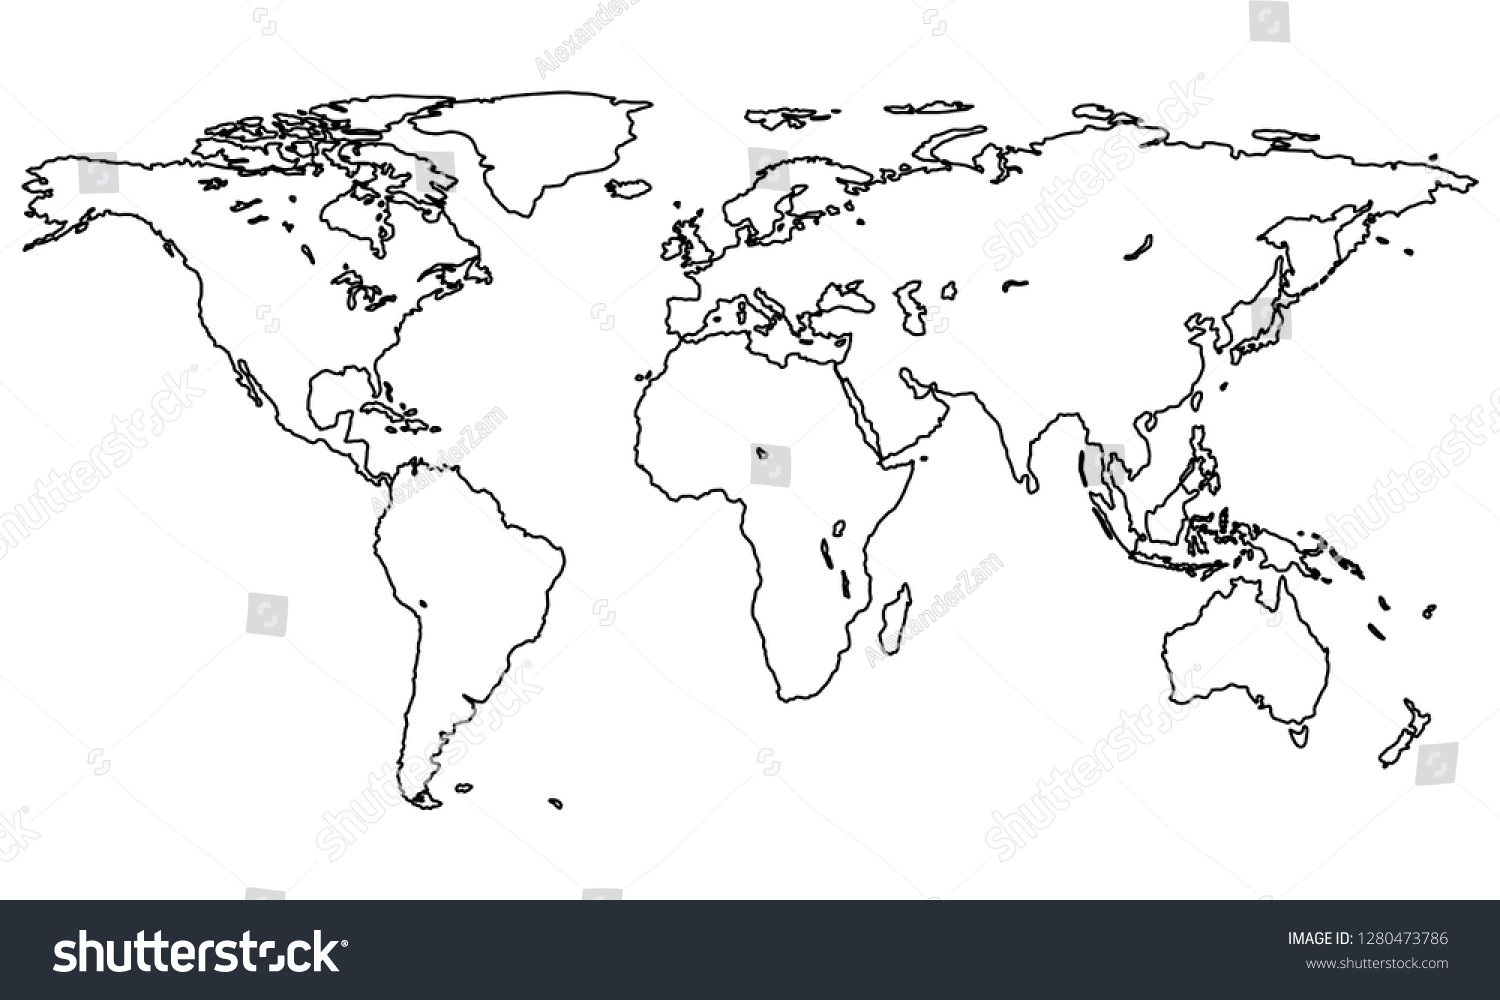 Illustration Contour World Map Elements This Stock Vector (Royalty Free ...